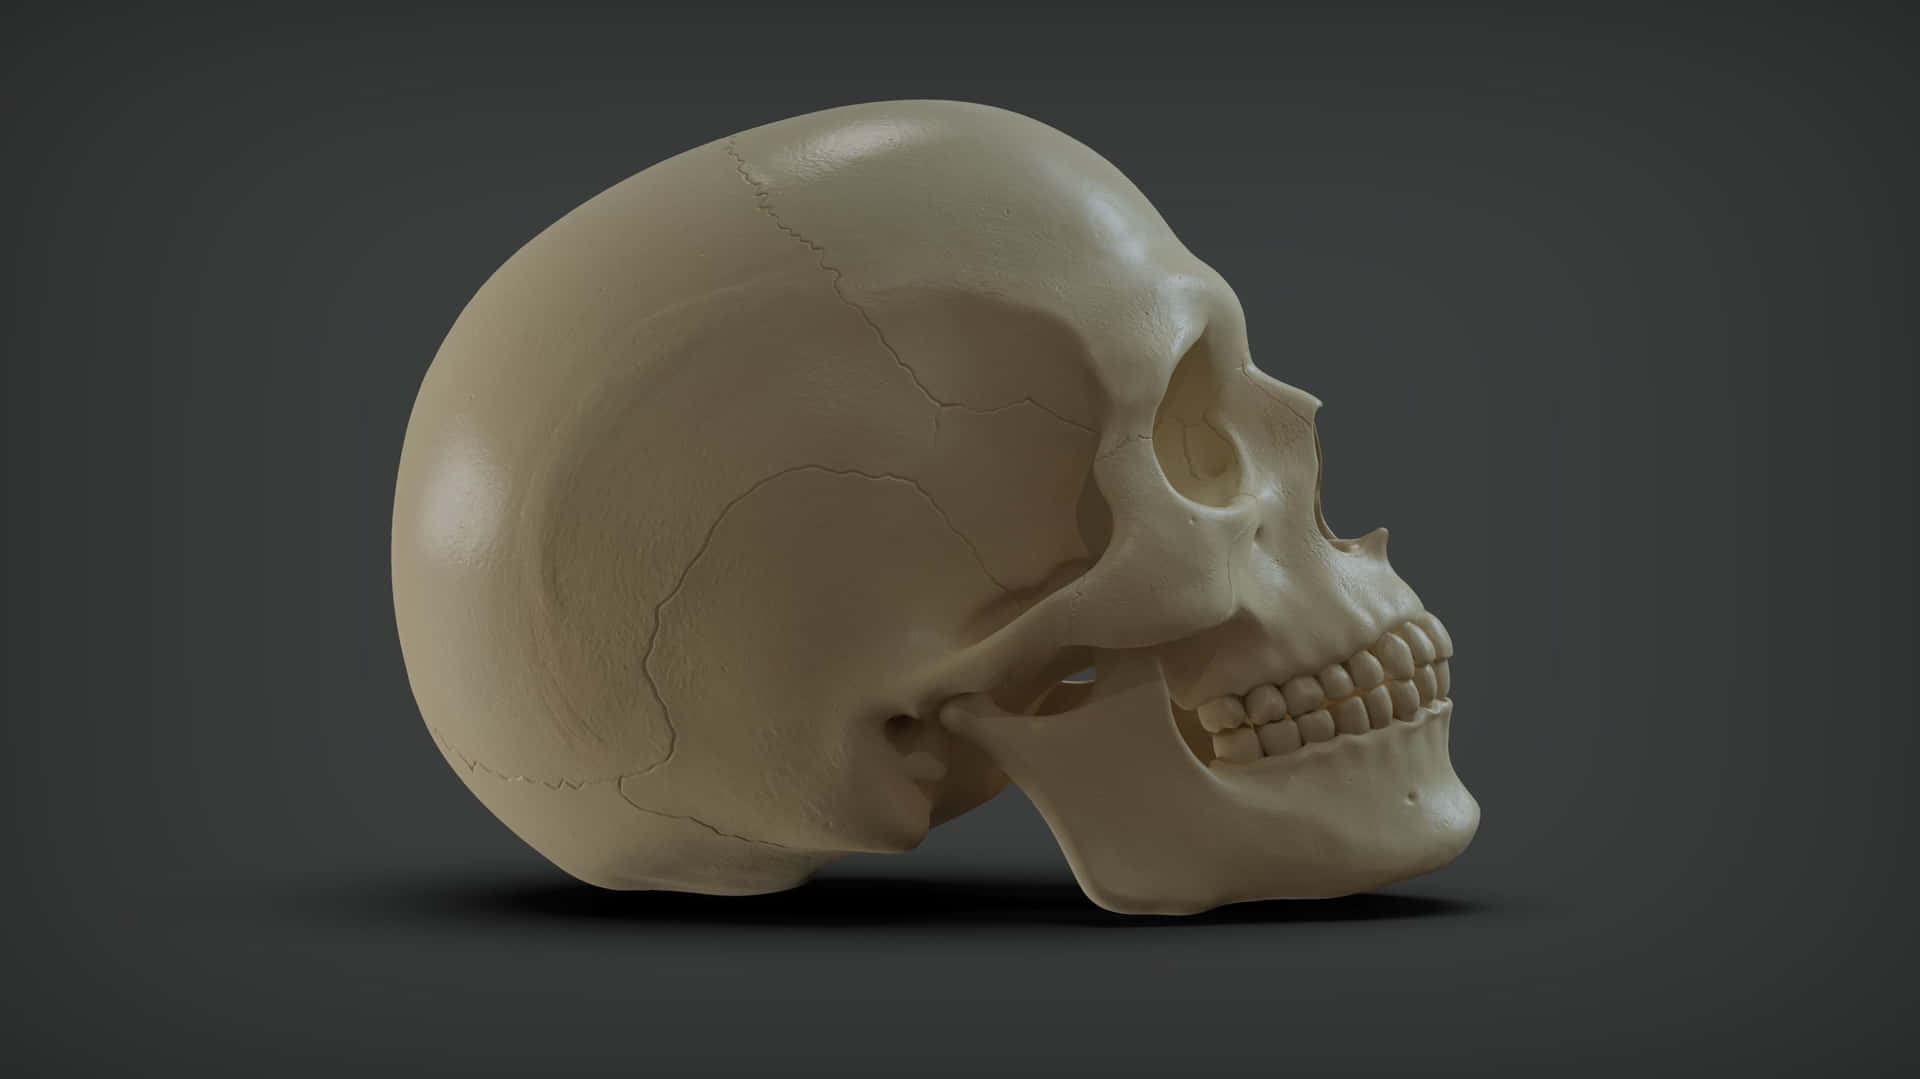 Intricate 3D Skull Rendering in High Definition Wallpaper